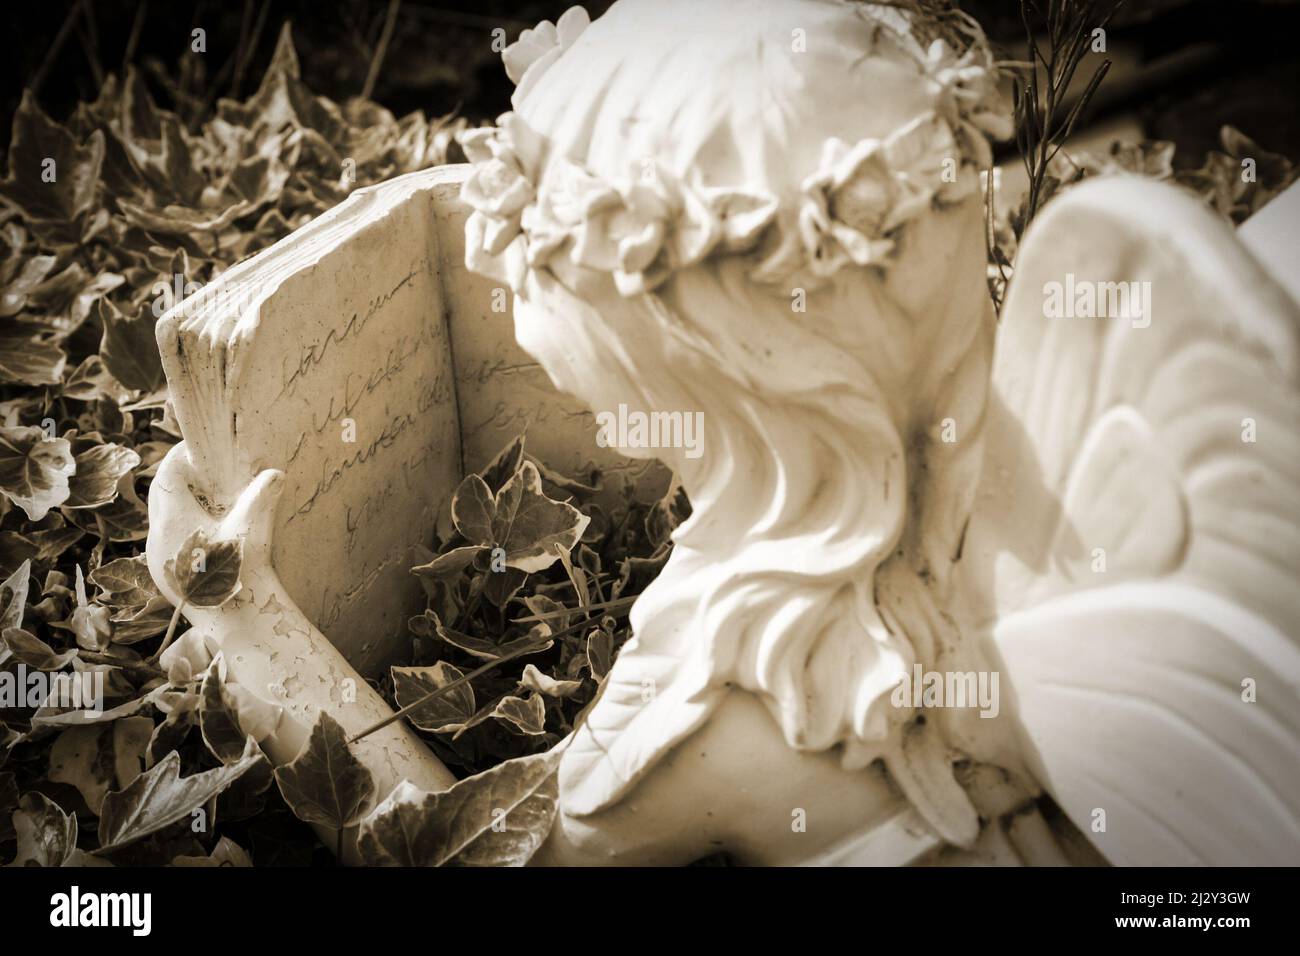 A Fairy Tale. A decorative stone garden sculpture in the form of an angel reading a book while lying in a bed of ivy.  Sepia retro tint. Stock Photo